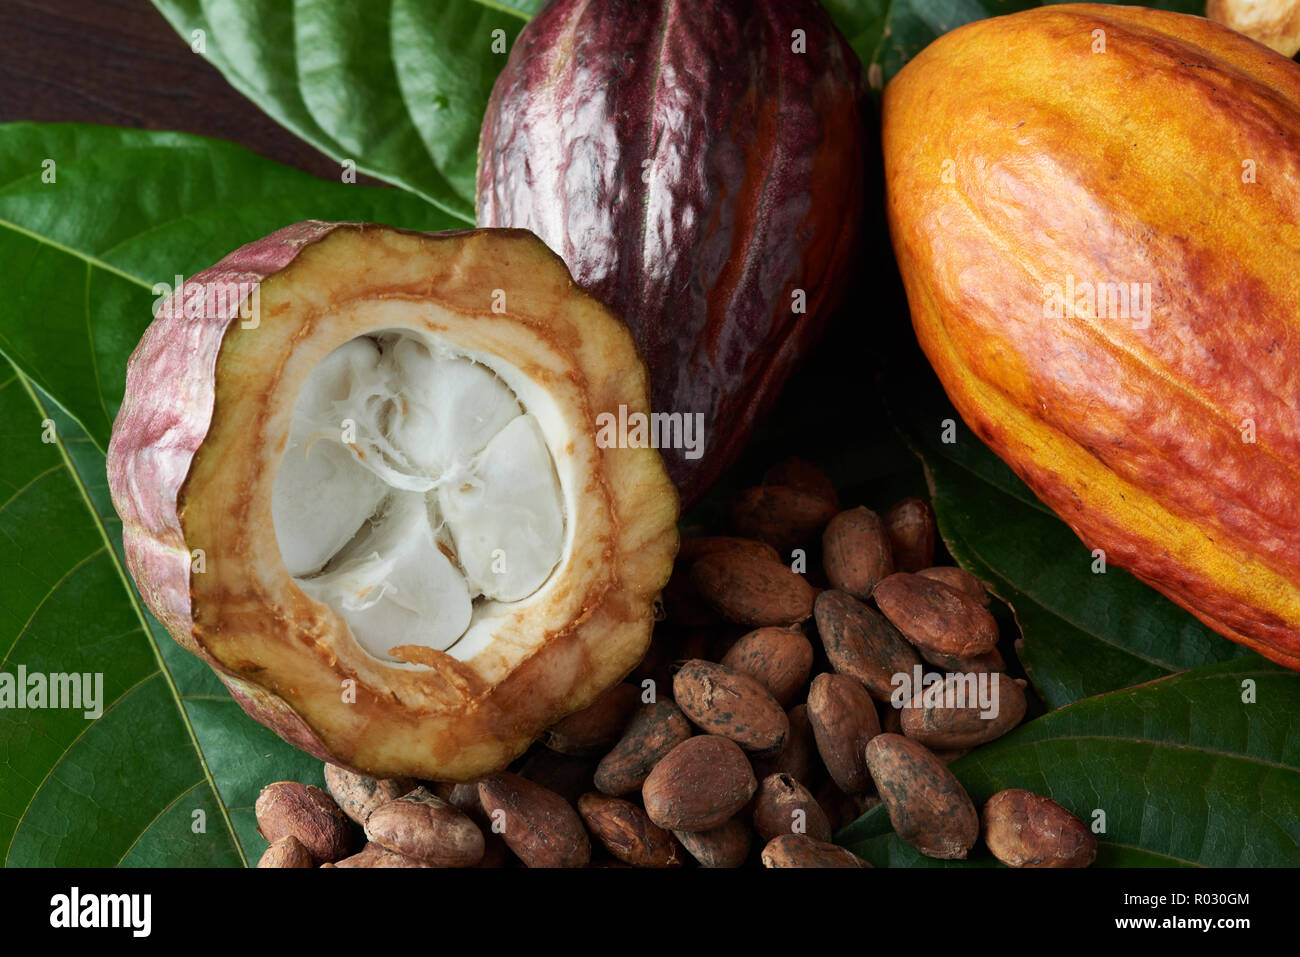 Chocolate raw ingredient in open cacao pod close up Stock Photo